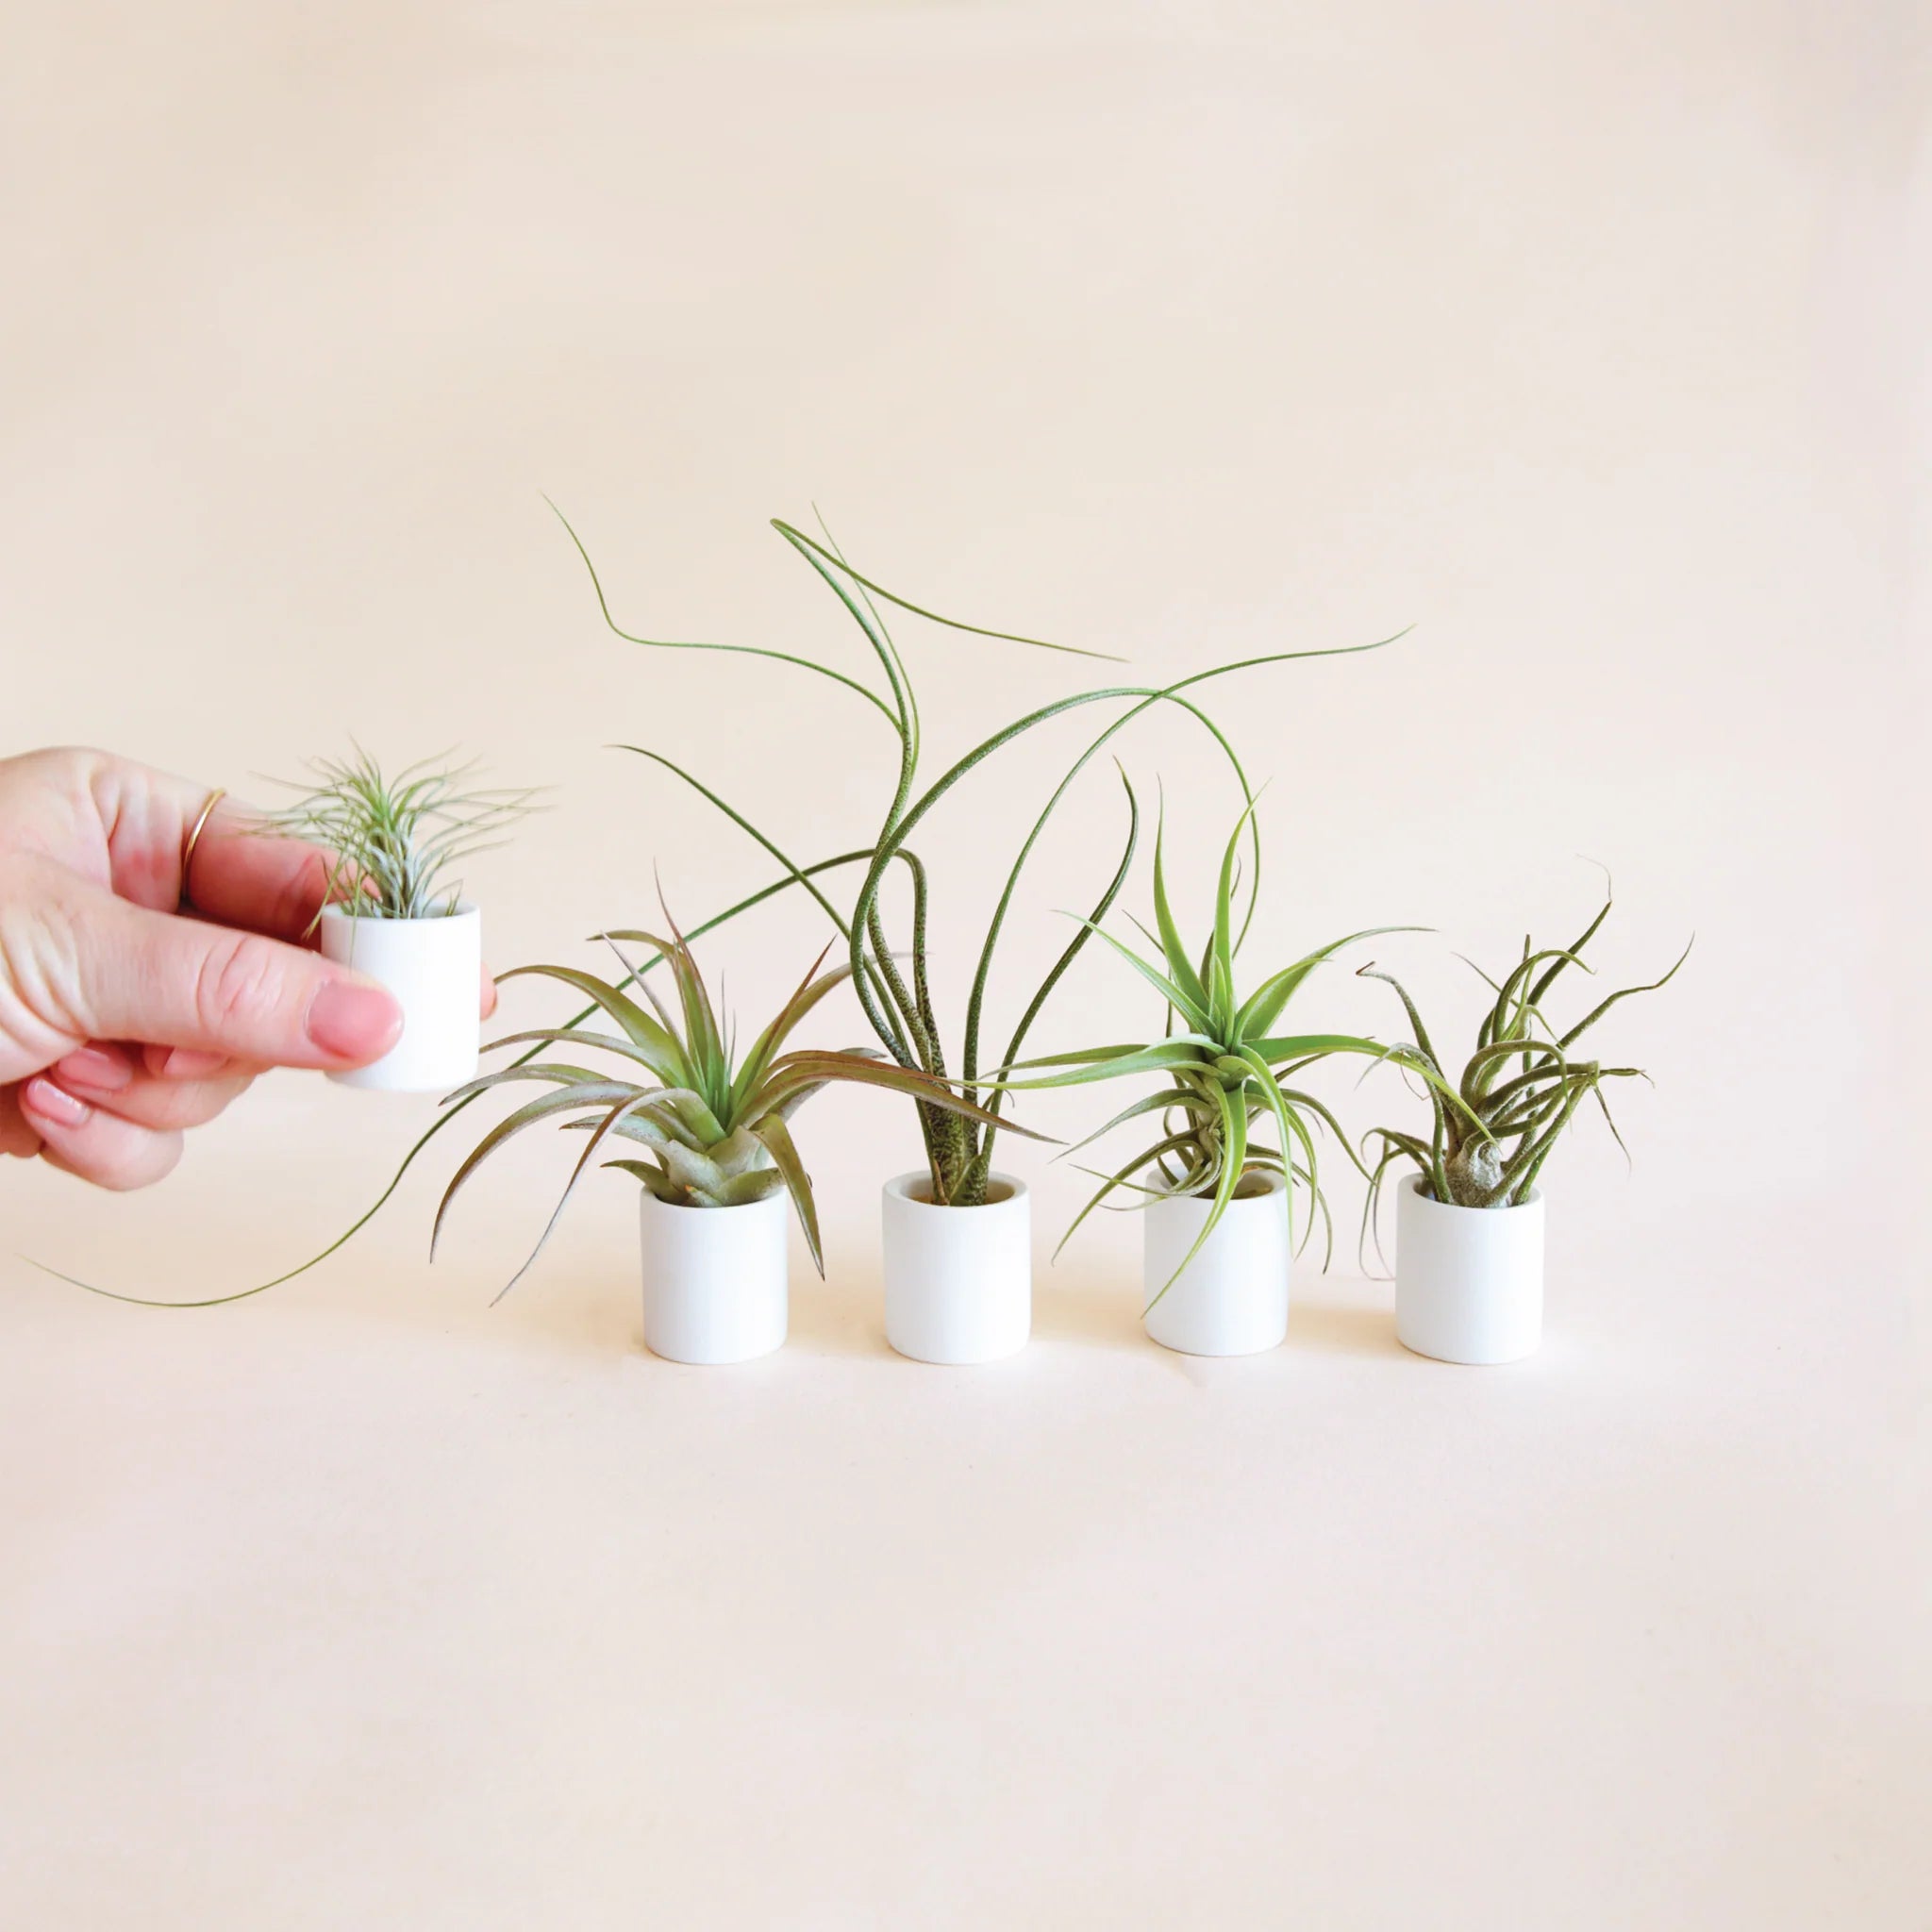 On a tan background is a set of tiny air plants and tiny white ceramic planters. 